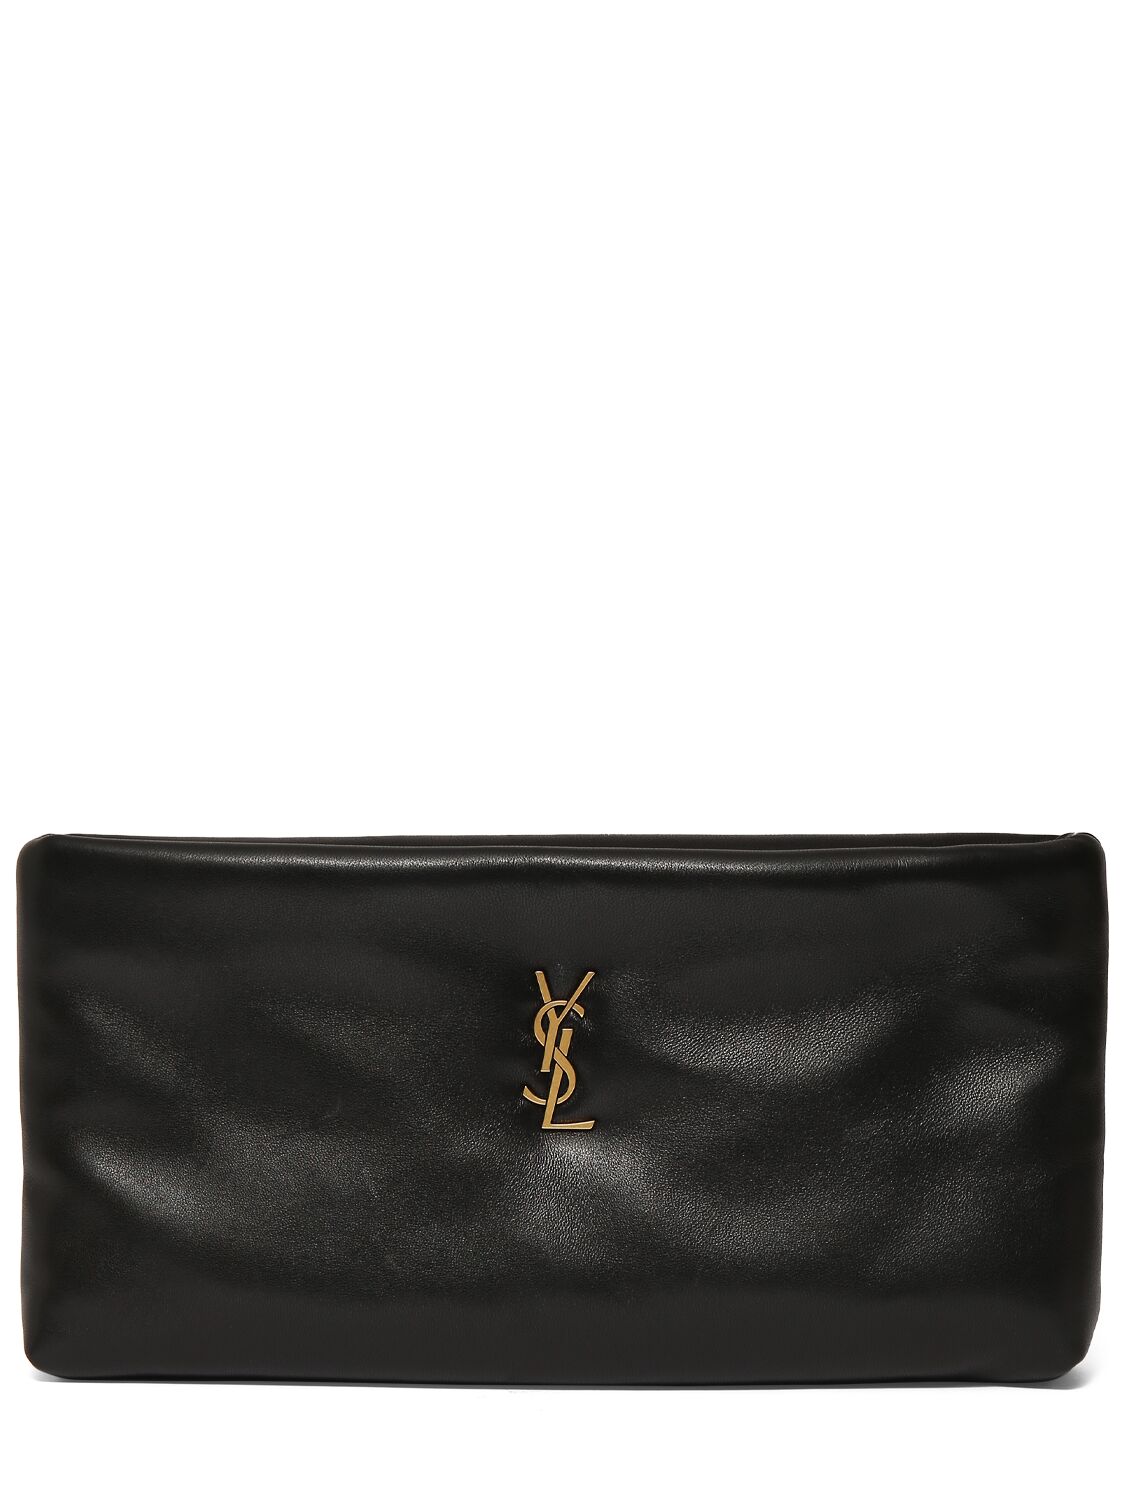 Image of Leather Long Zipped Pouch